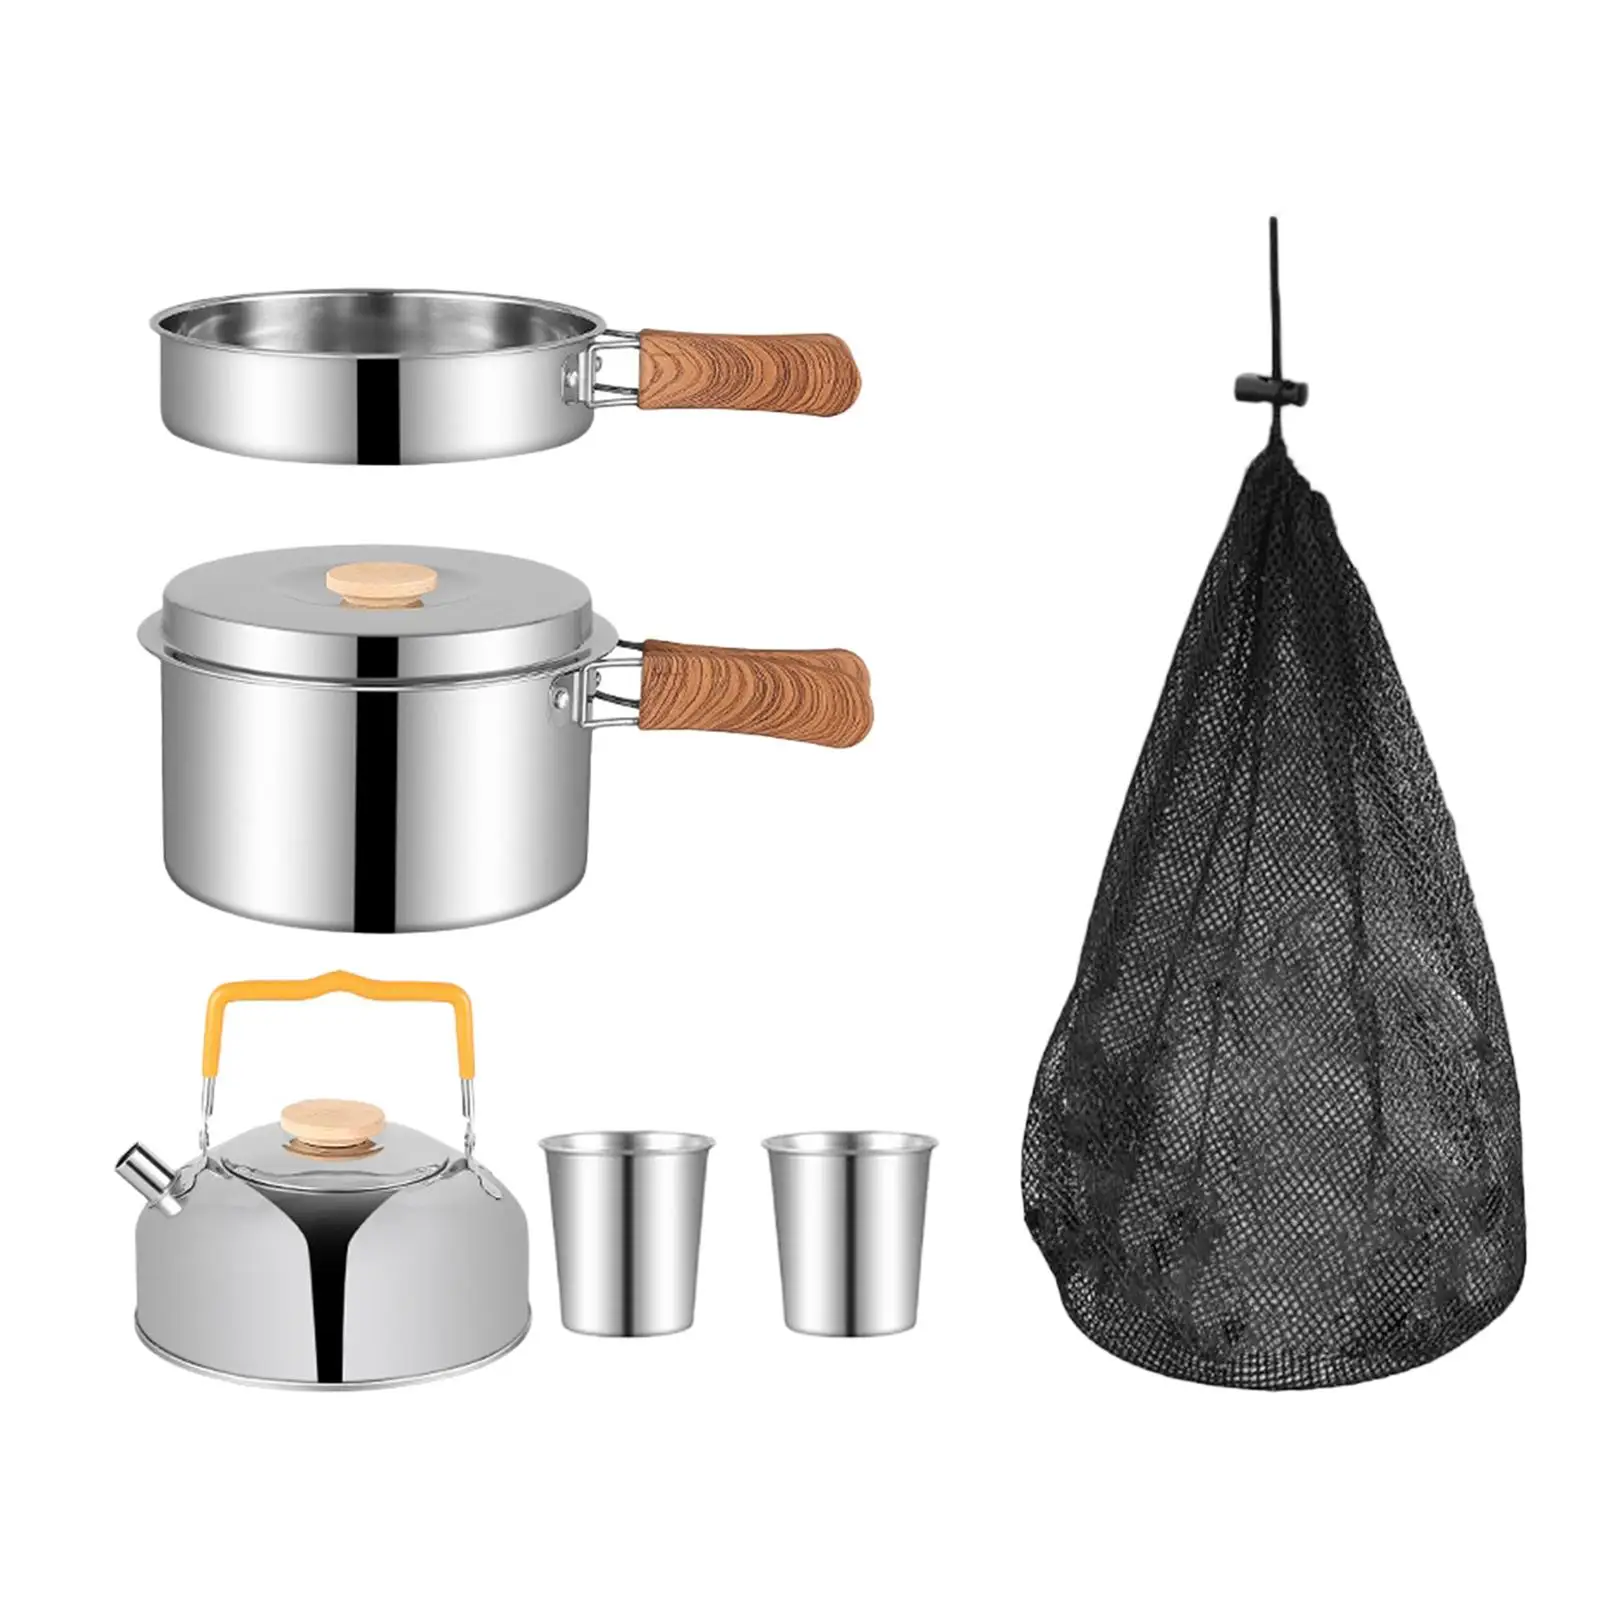 5 Pieces Camping Cookware Set Camping Pot and Pan Kettle Campfire Kettle with Carry Bag Outdoor Cook Gear for Picnic Trekking